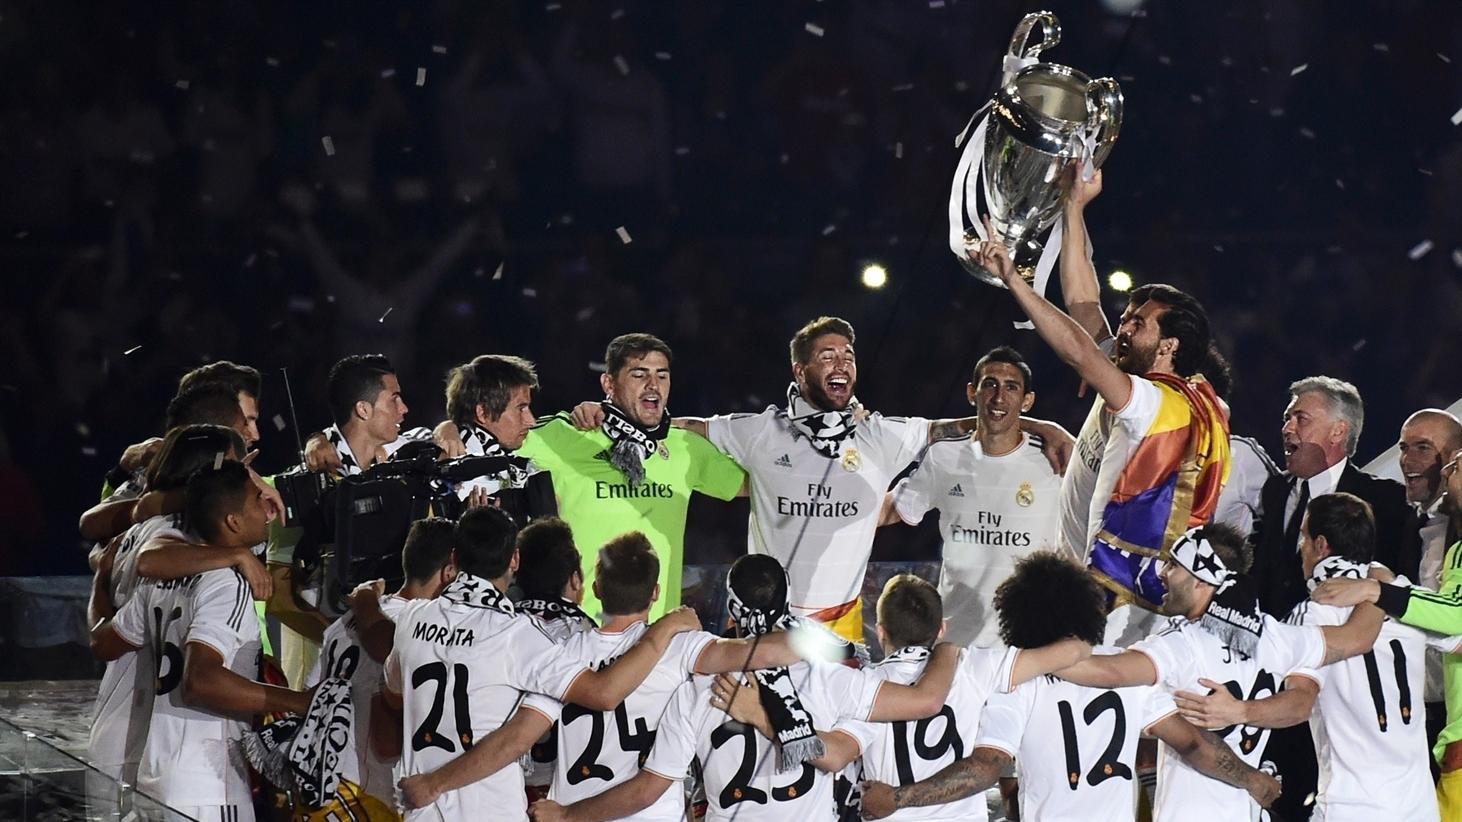 13 ucl real madrid